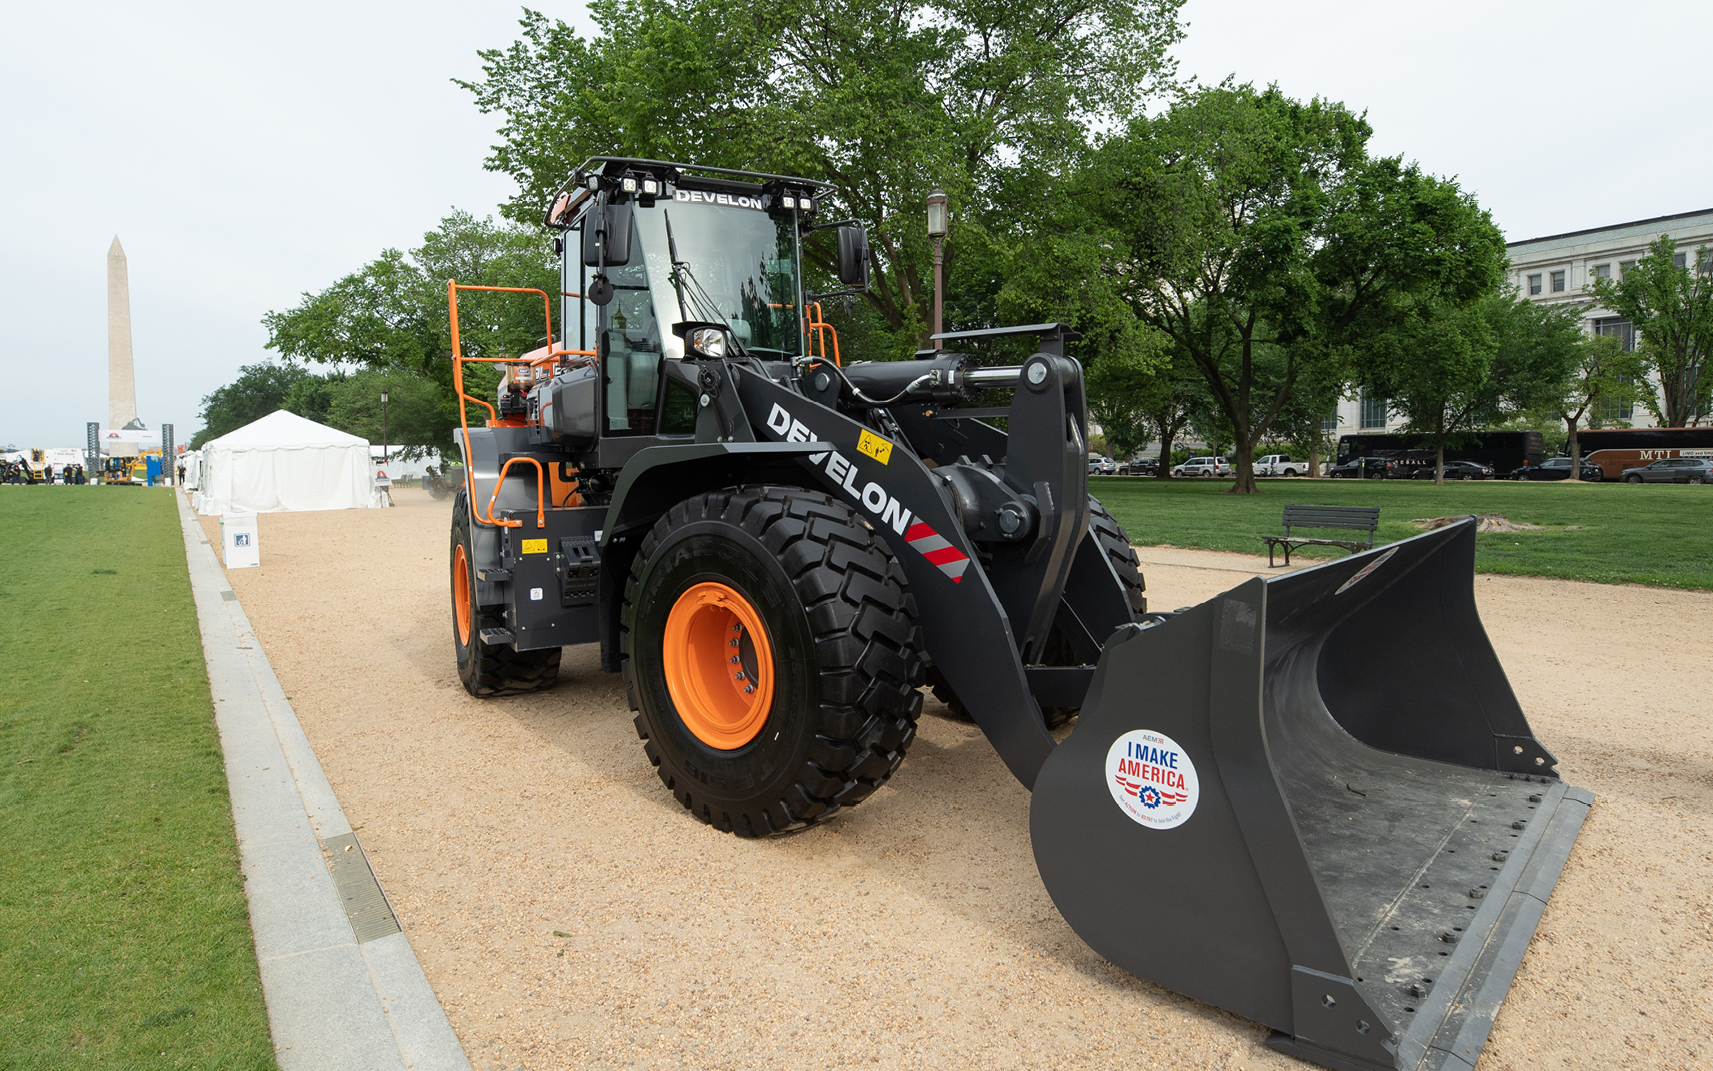 A DEVELON DL320-7 wheel loader on display on the National Mall in Washington, D.C. 